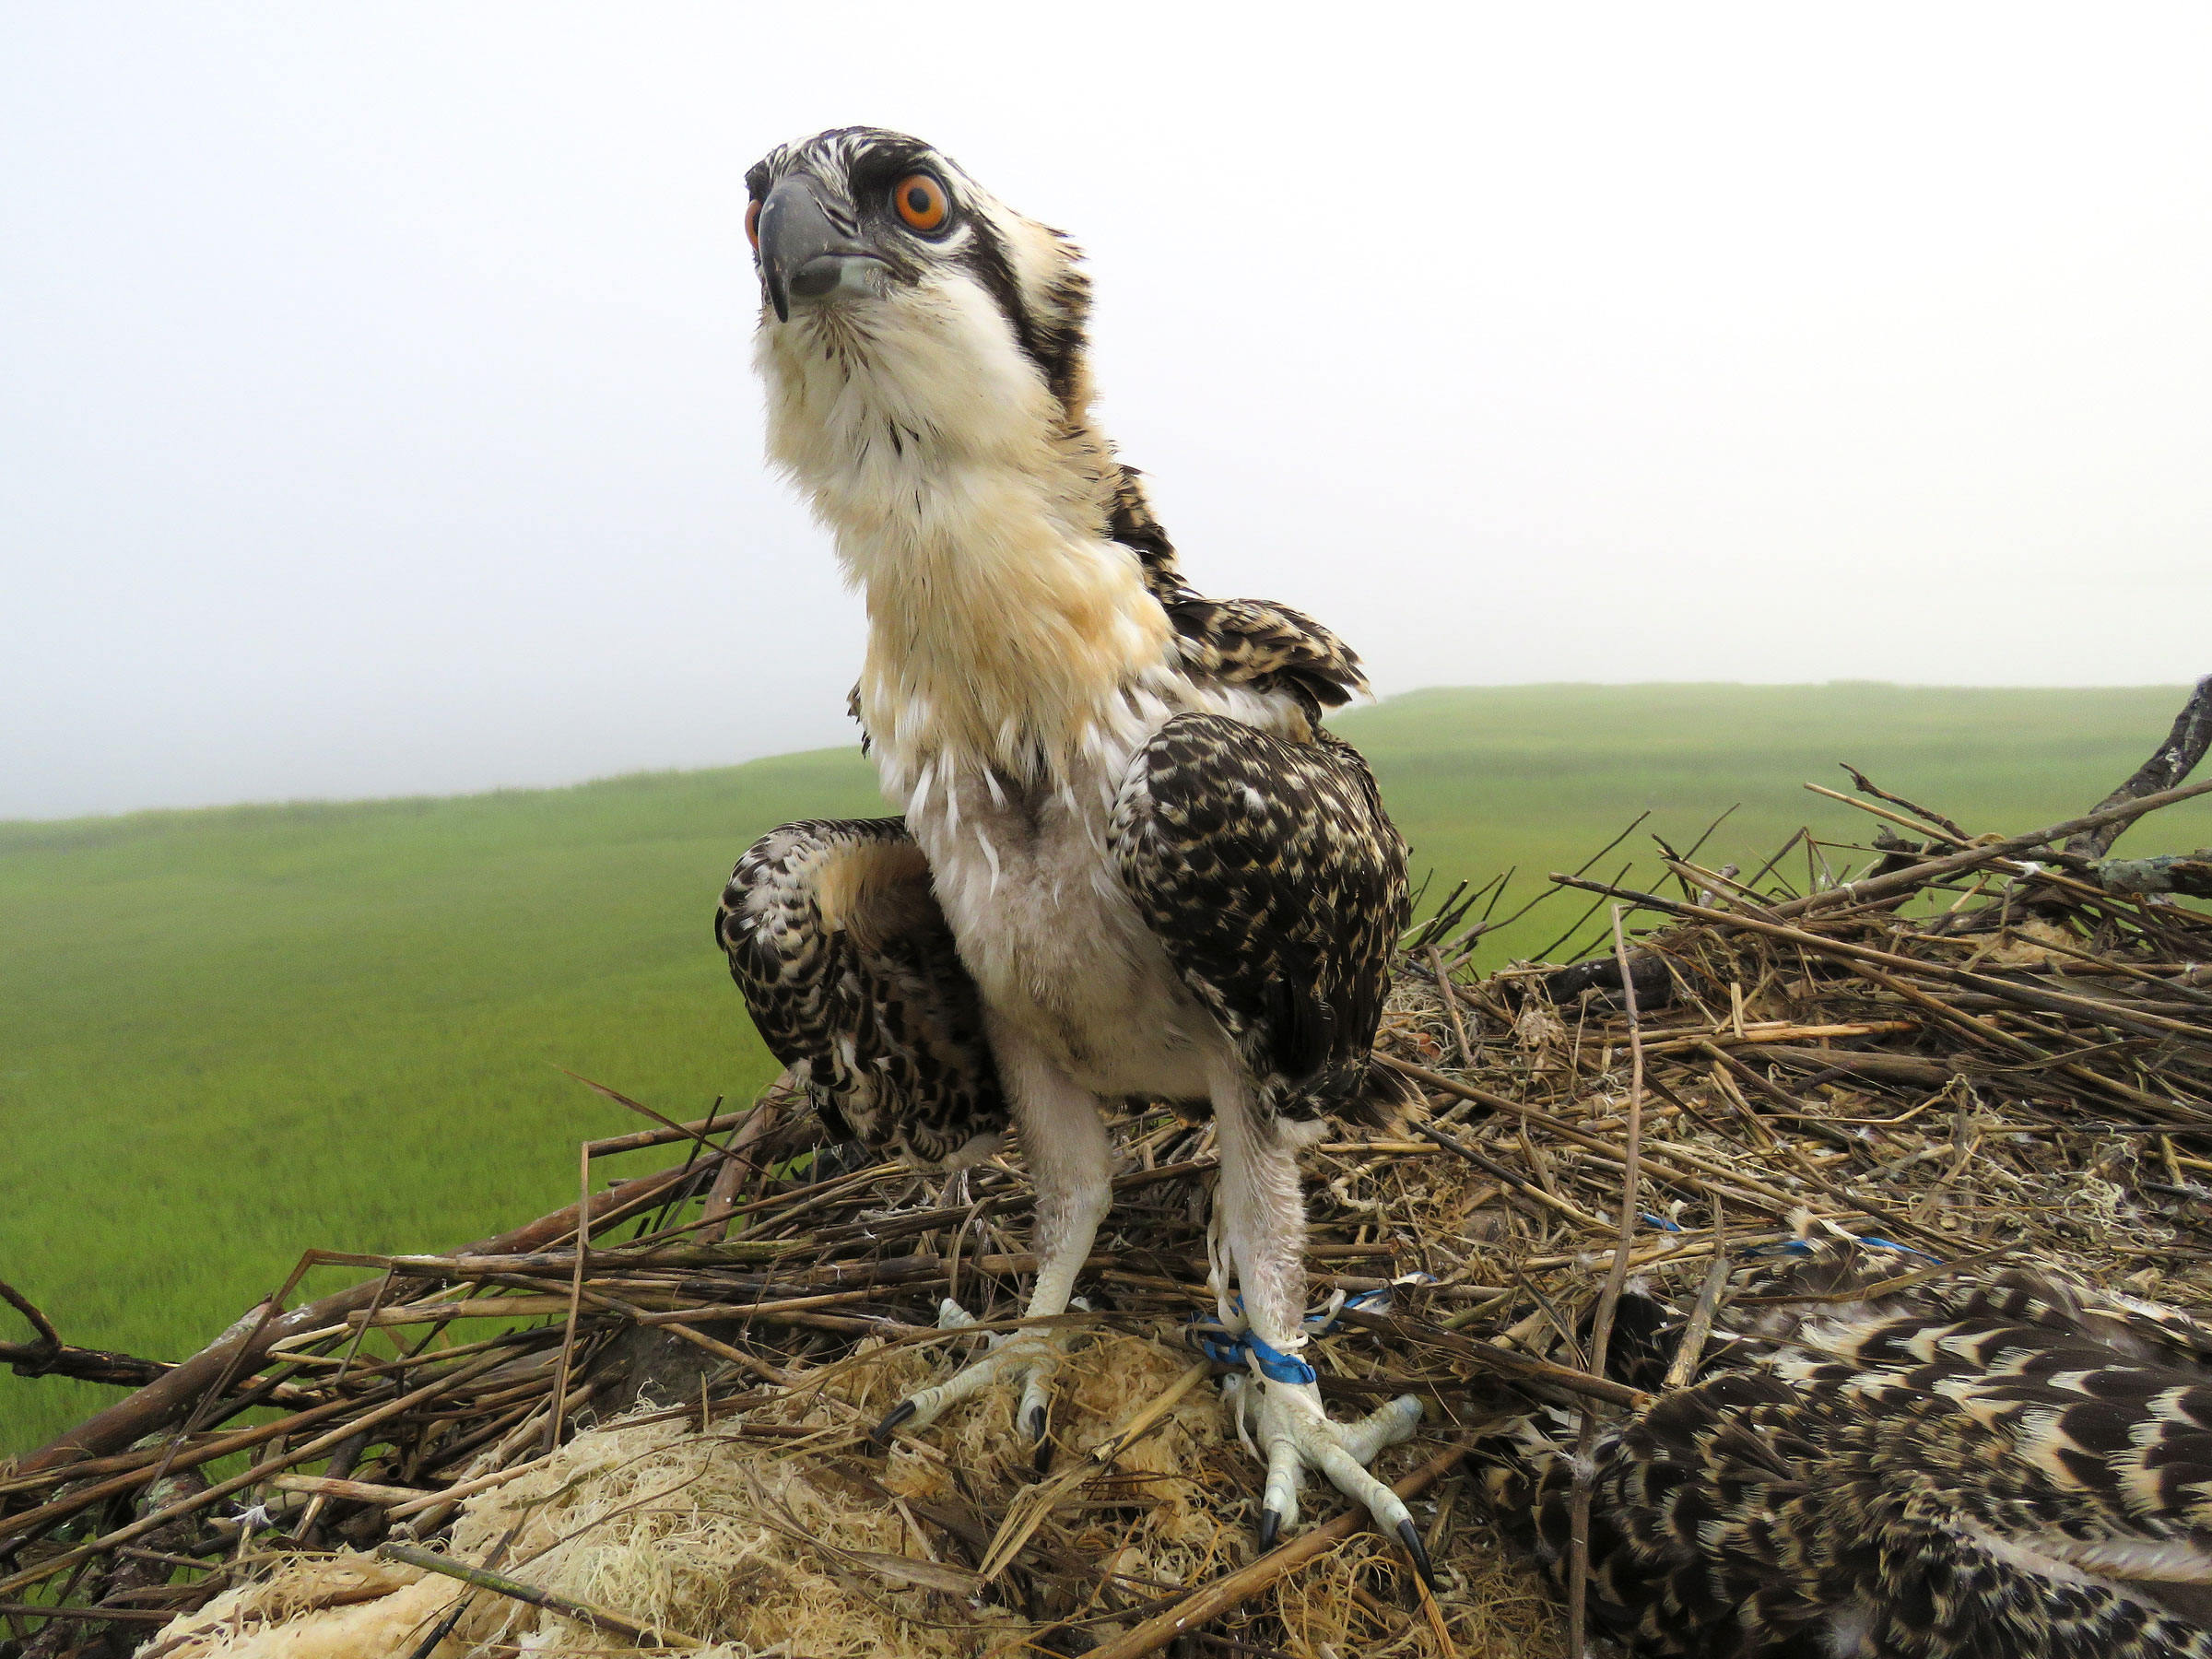 More Plastic in the World Means More Plastic in Osprey Nests | Audubon